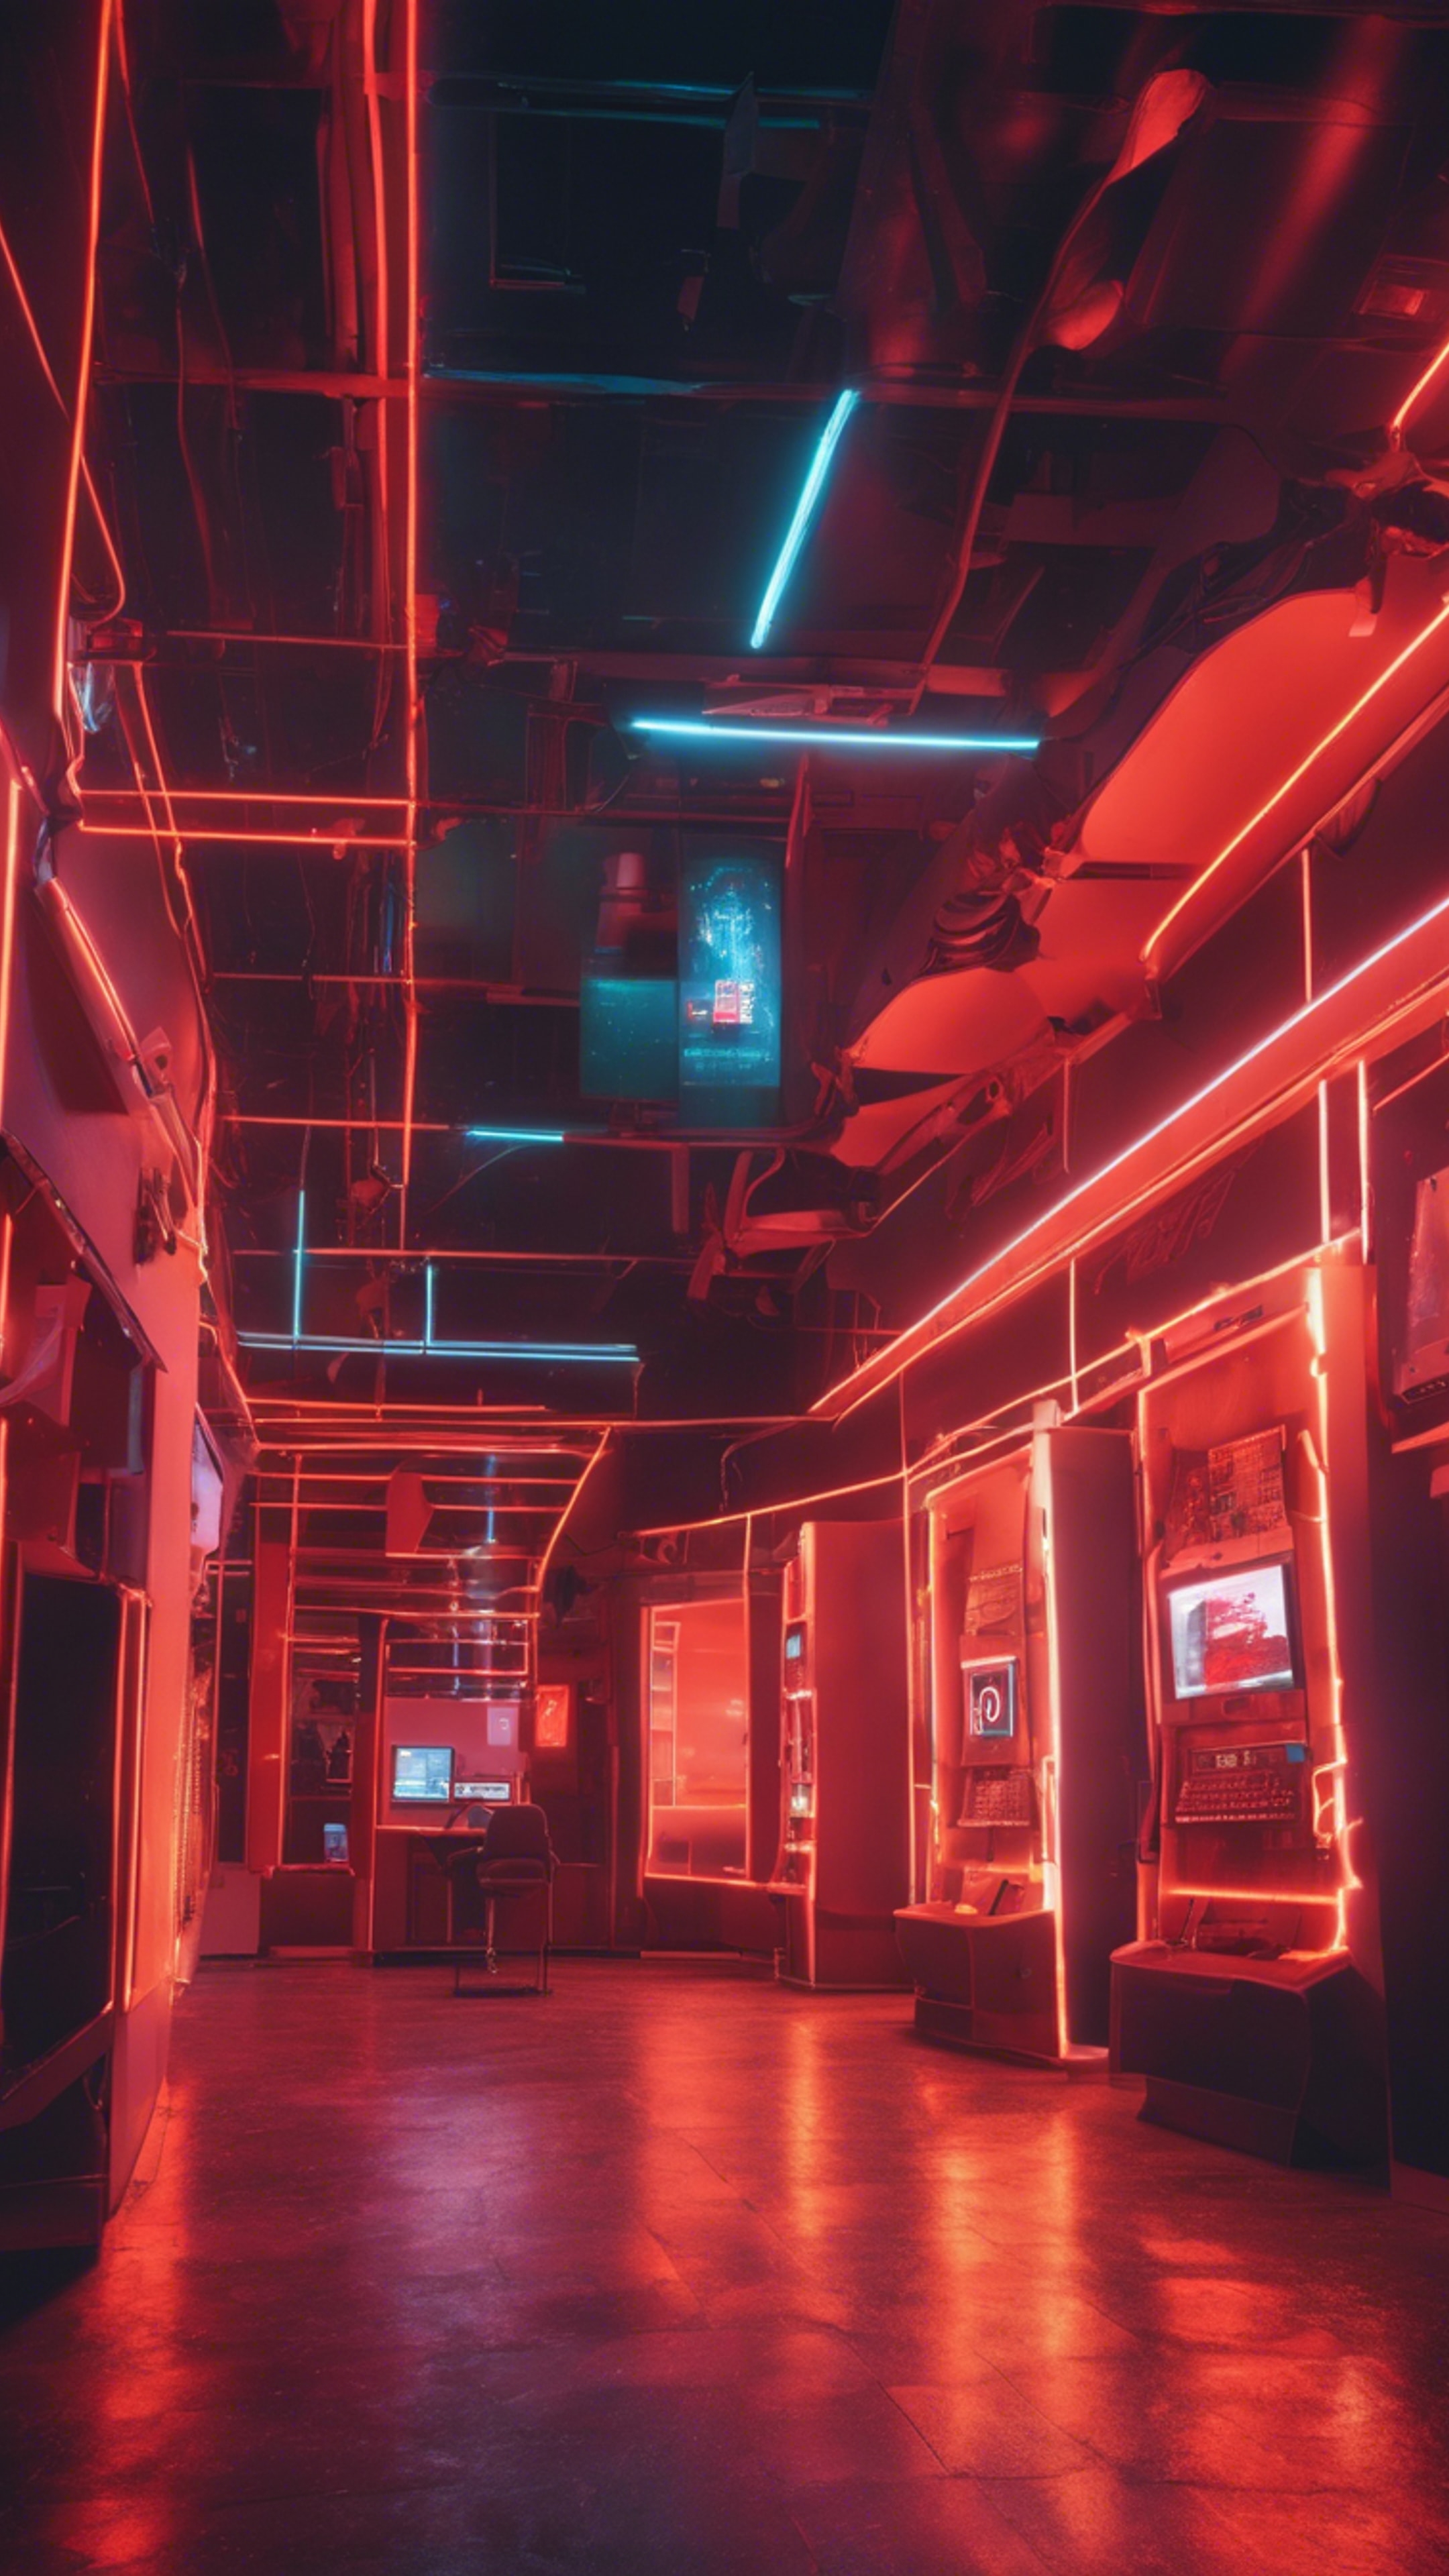 An architecturally unique cyber cafe glowing with neon red and orange lights at night. Tapéta[37c23e18da0f466d9ff8]